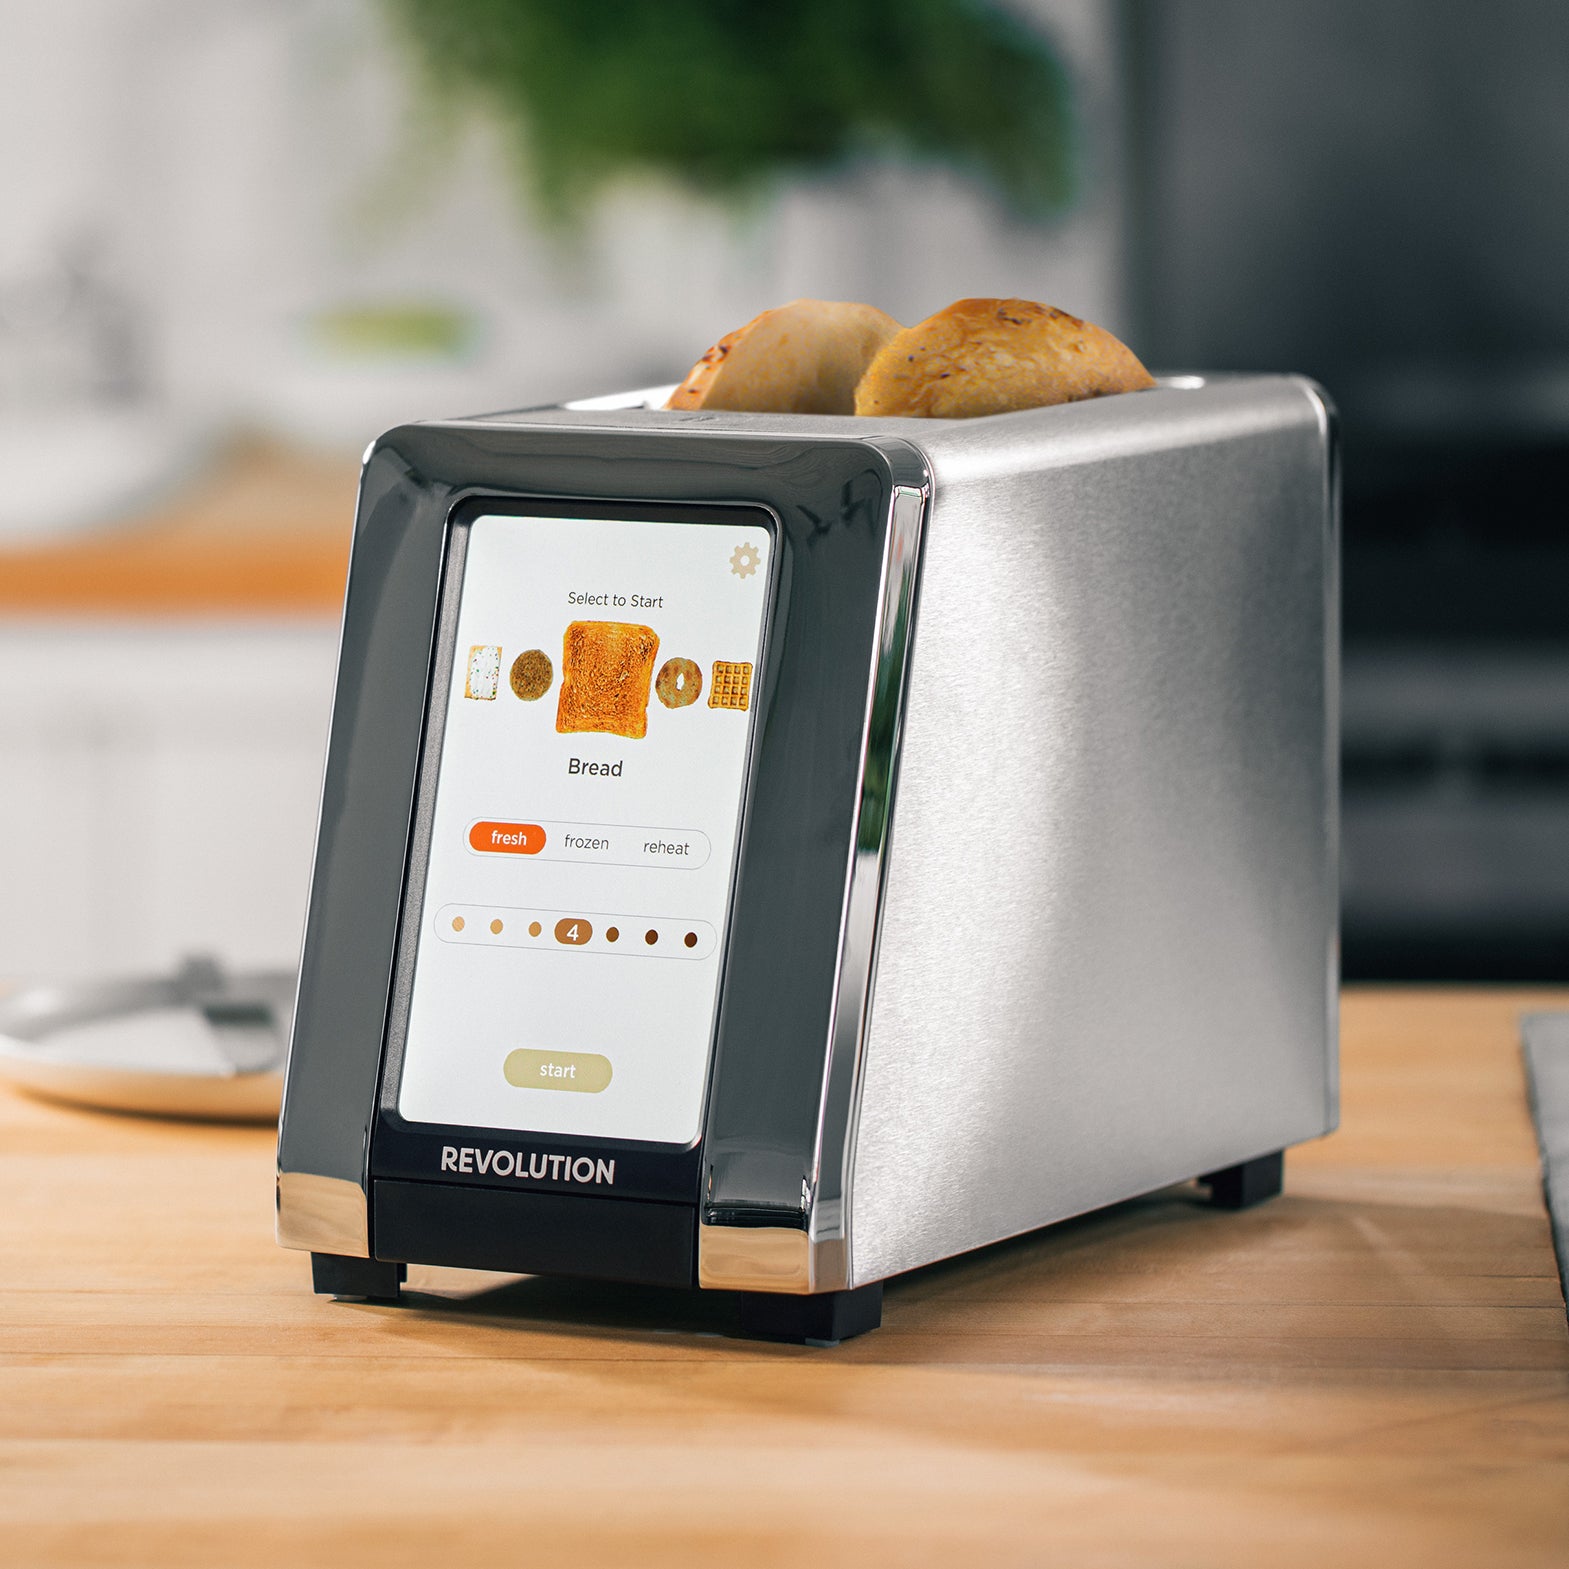 Do we really need a $340, Wi-Fi enabled toaster?